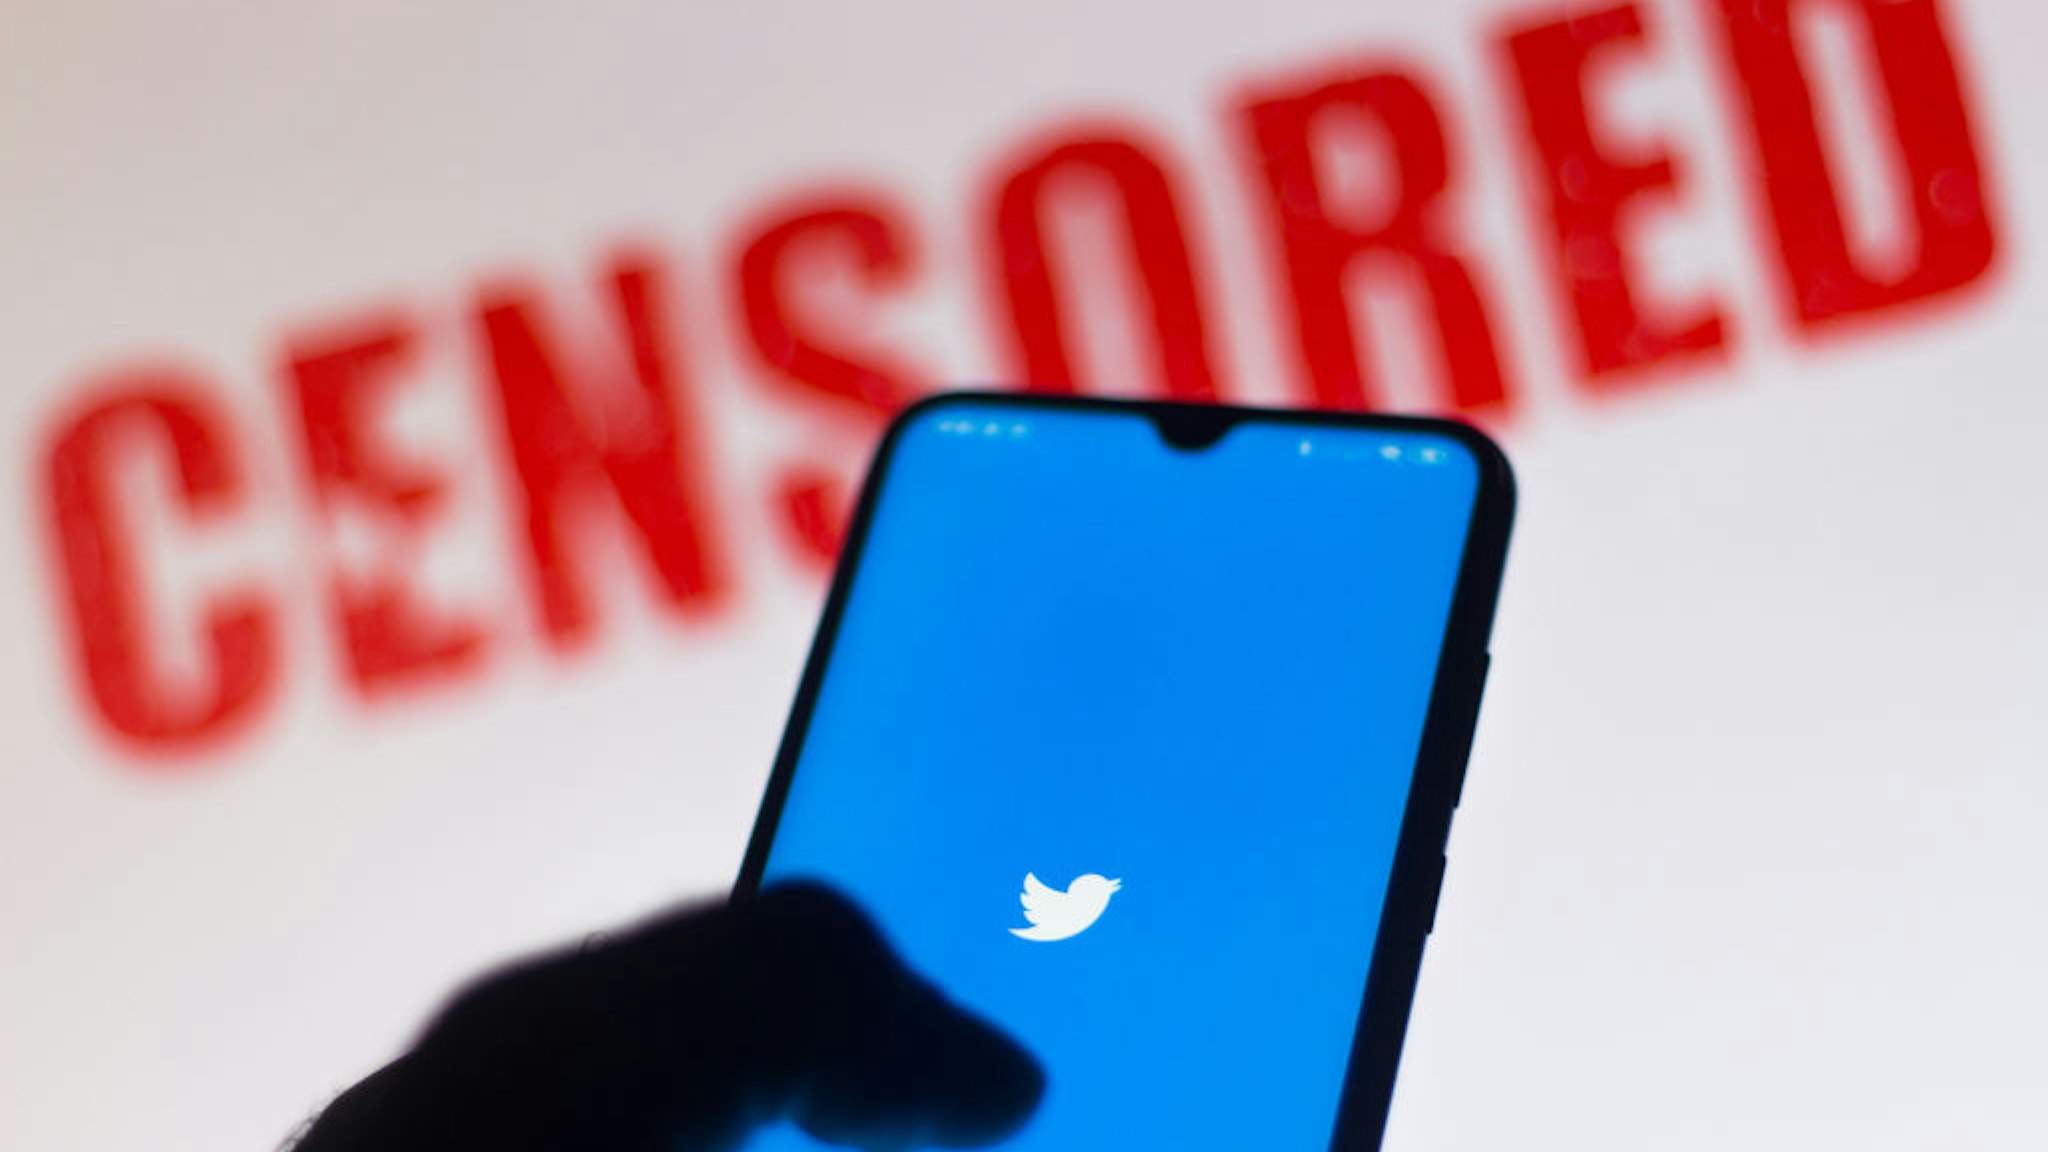 BRAZIL - 2020/06/15: In this photo illustration the Twitter logo is displayed on a smartphone and a red alerting word "CENSORED" on the blurred background. (Photo Illustration by Rafael Henrique/SOPA Images/LightRocket via Getty Images)